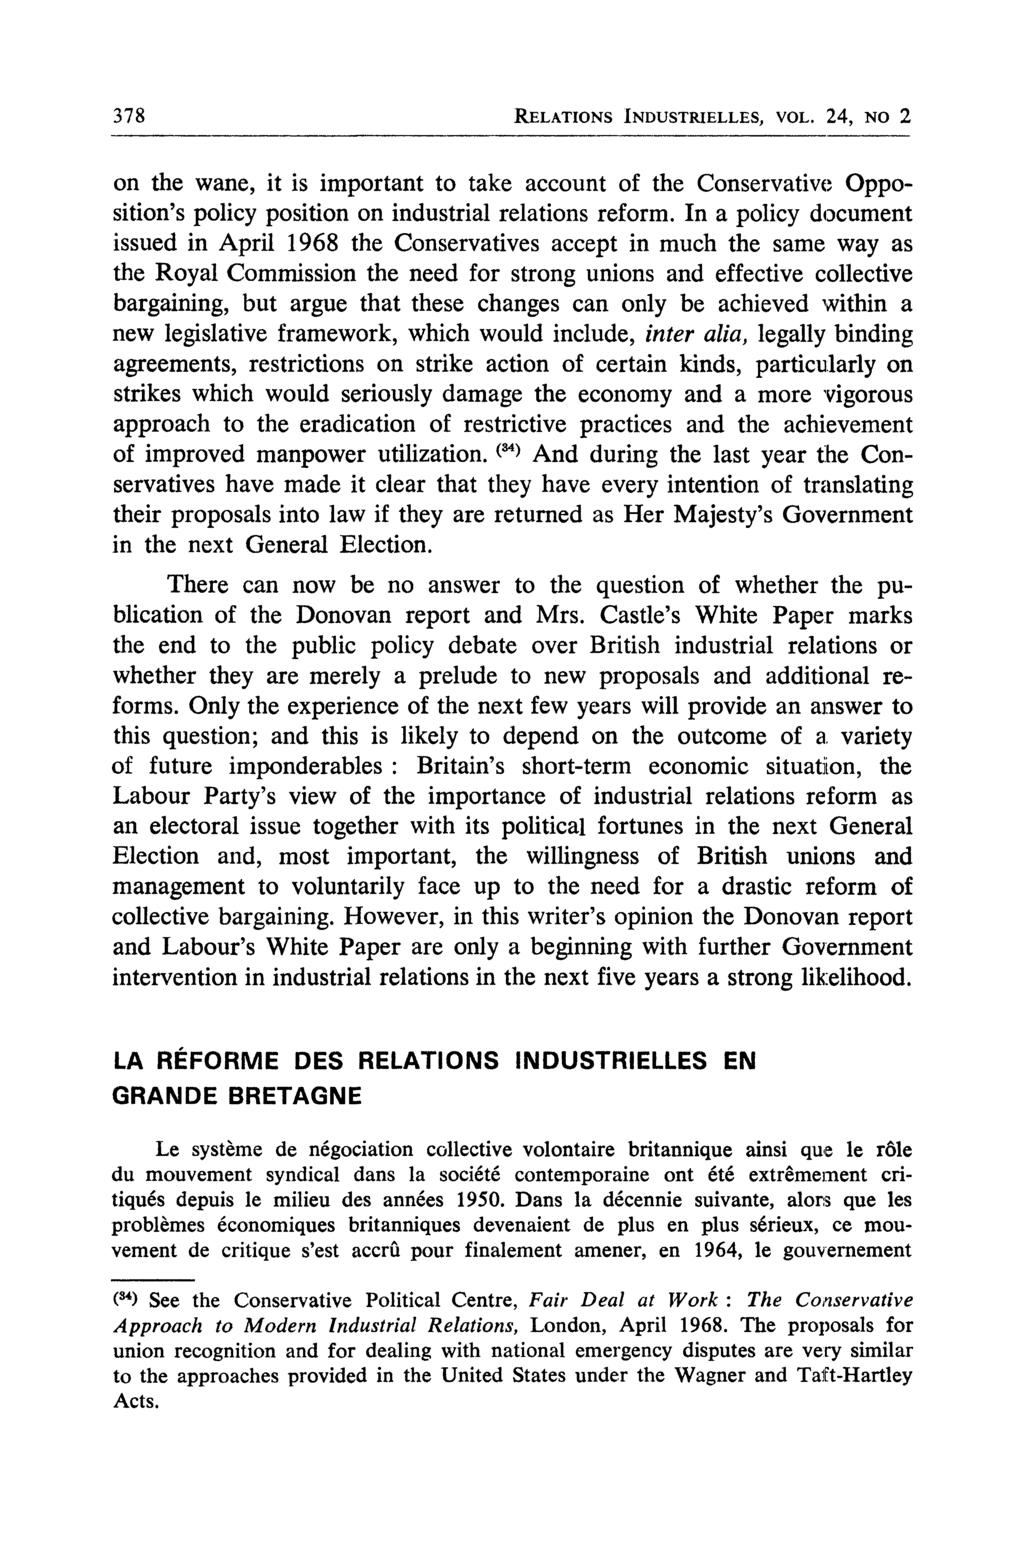 378 RELATIONS INDUSTRIELLES, VOL. 24, NO 2 on the wane, it is important to take account of the Conservative Opposition^ policy position on industrial relations reform.